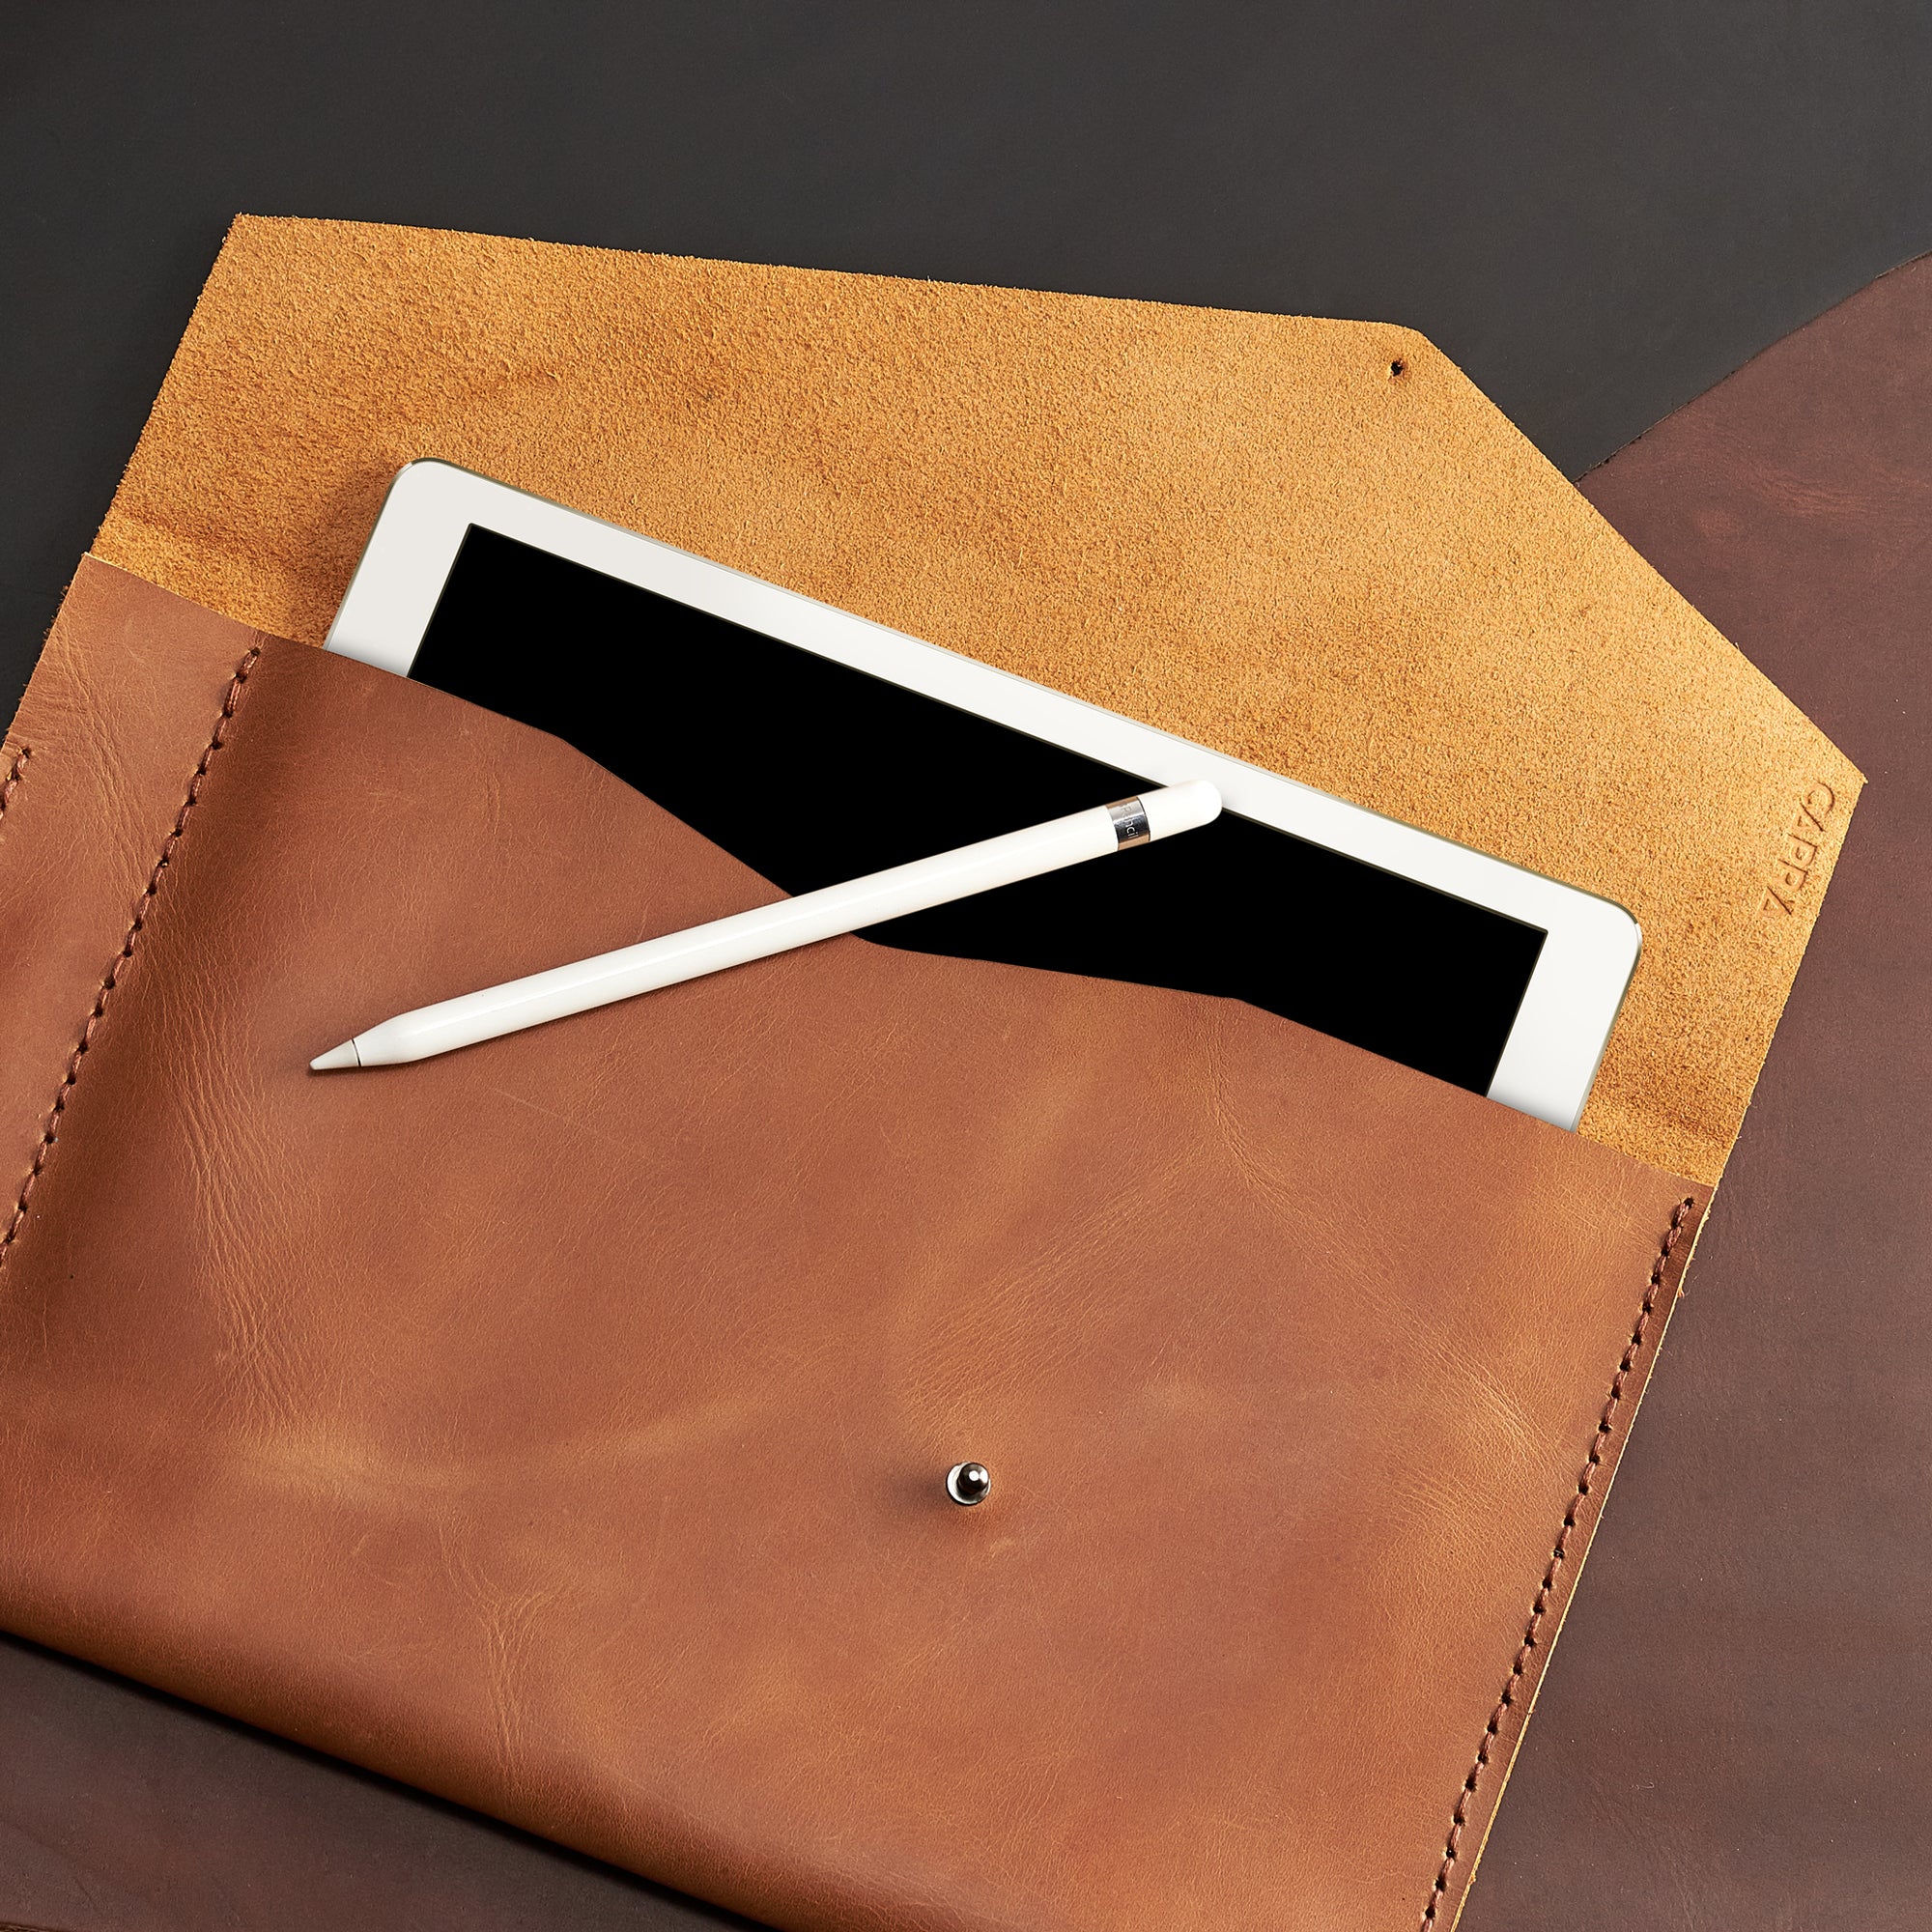 Soft Anti Scratch Interior. iPad Sleeve. iPad Leather Case Tan With Apple Pencil Holder by Capra Leather